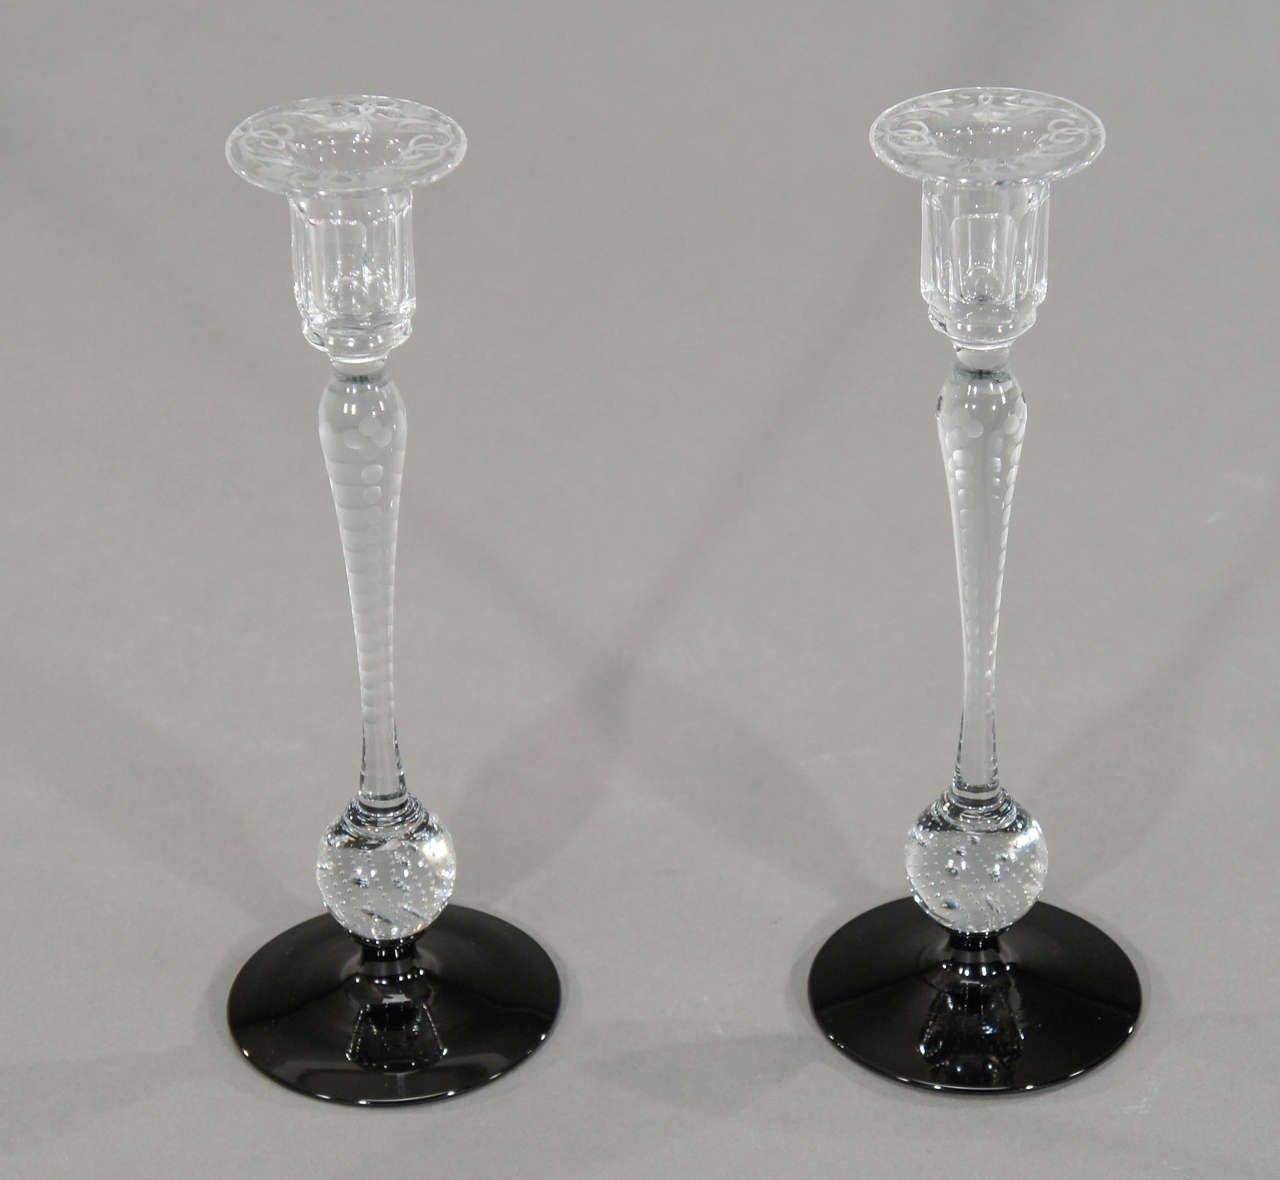 There are candlesticks and there is this pair!
Hand blown Pairpoint crystal stems with  controlled bubble connectors and a black base. Totally dramatic and to top it off, the bobeches and stems are wheel cut with a simple and elegant floral pattern.